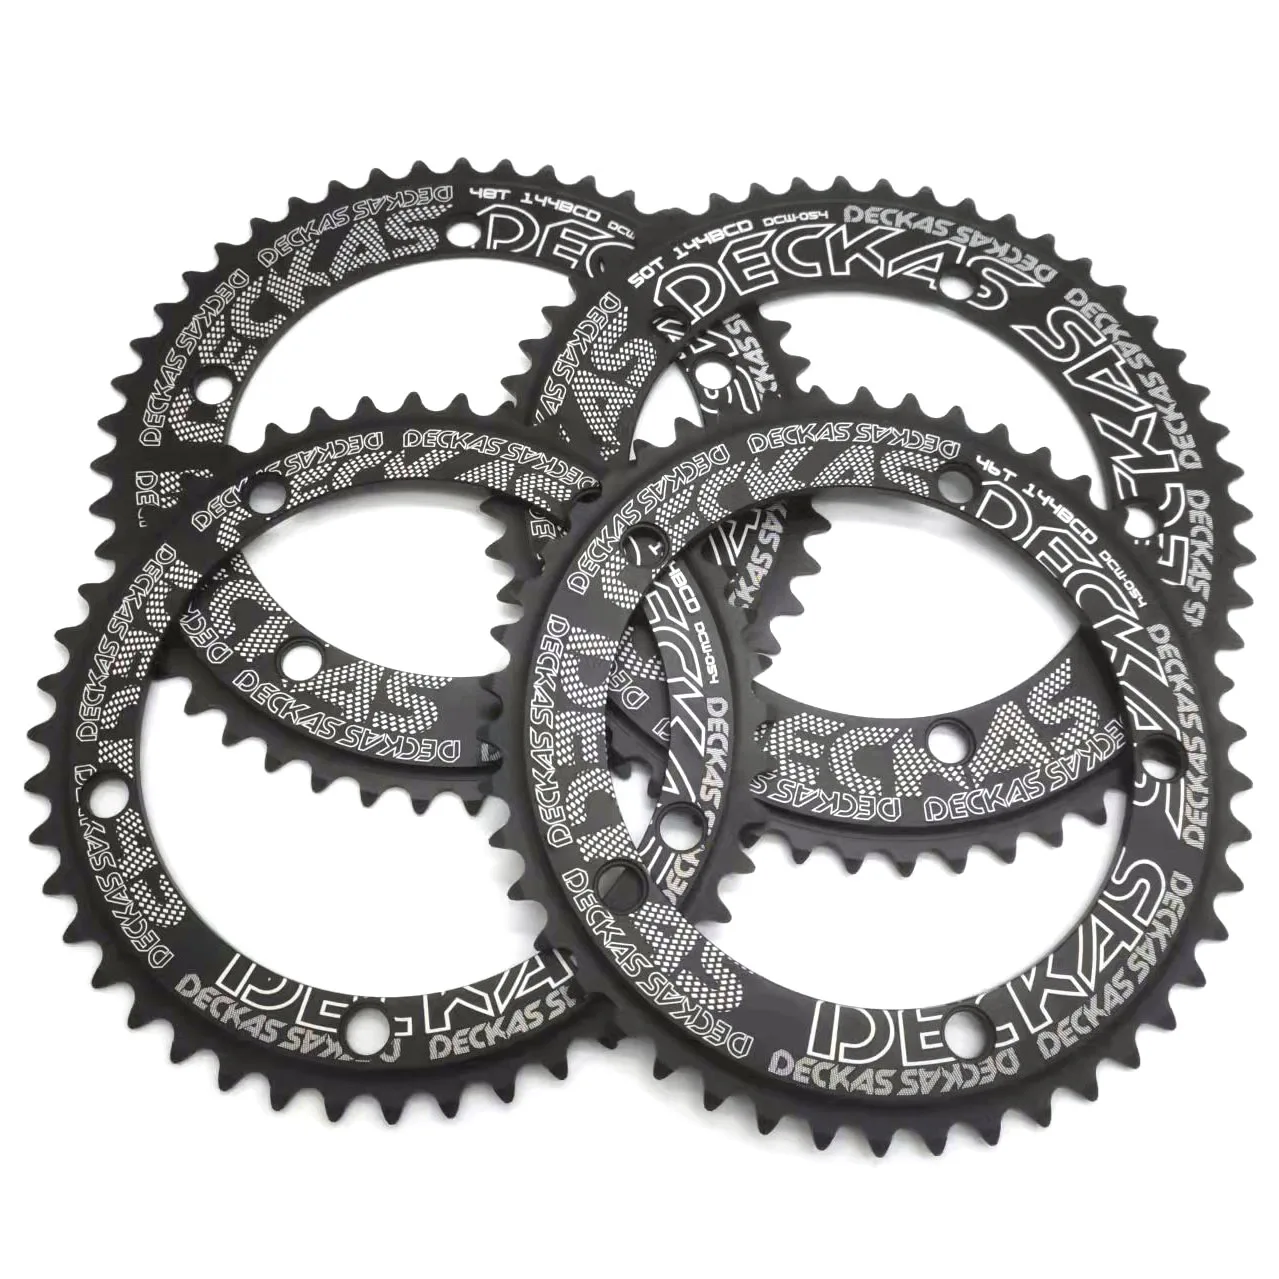 Deckas 144BCD Chainring 44T 46T 48T 50T 52T 54T 56T Single Chainring Upgraded Version Of Positive Negative Teeth For TMB Bike